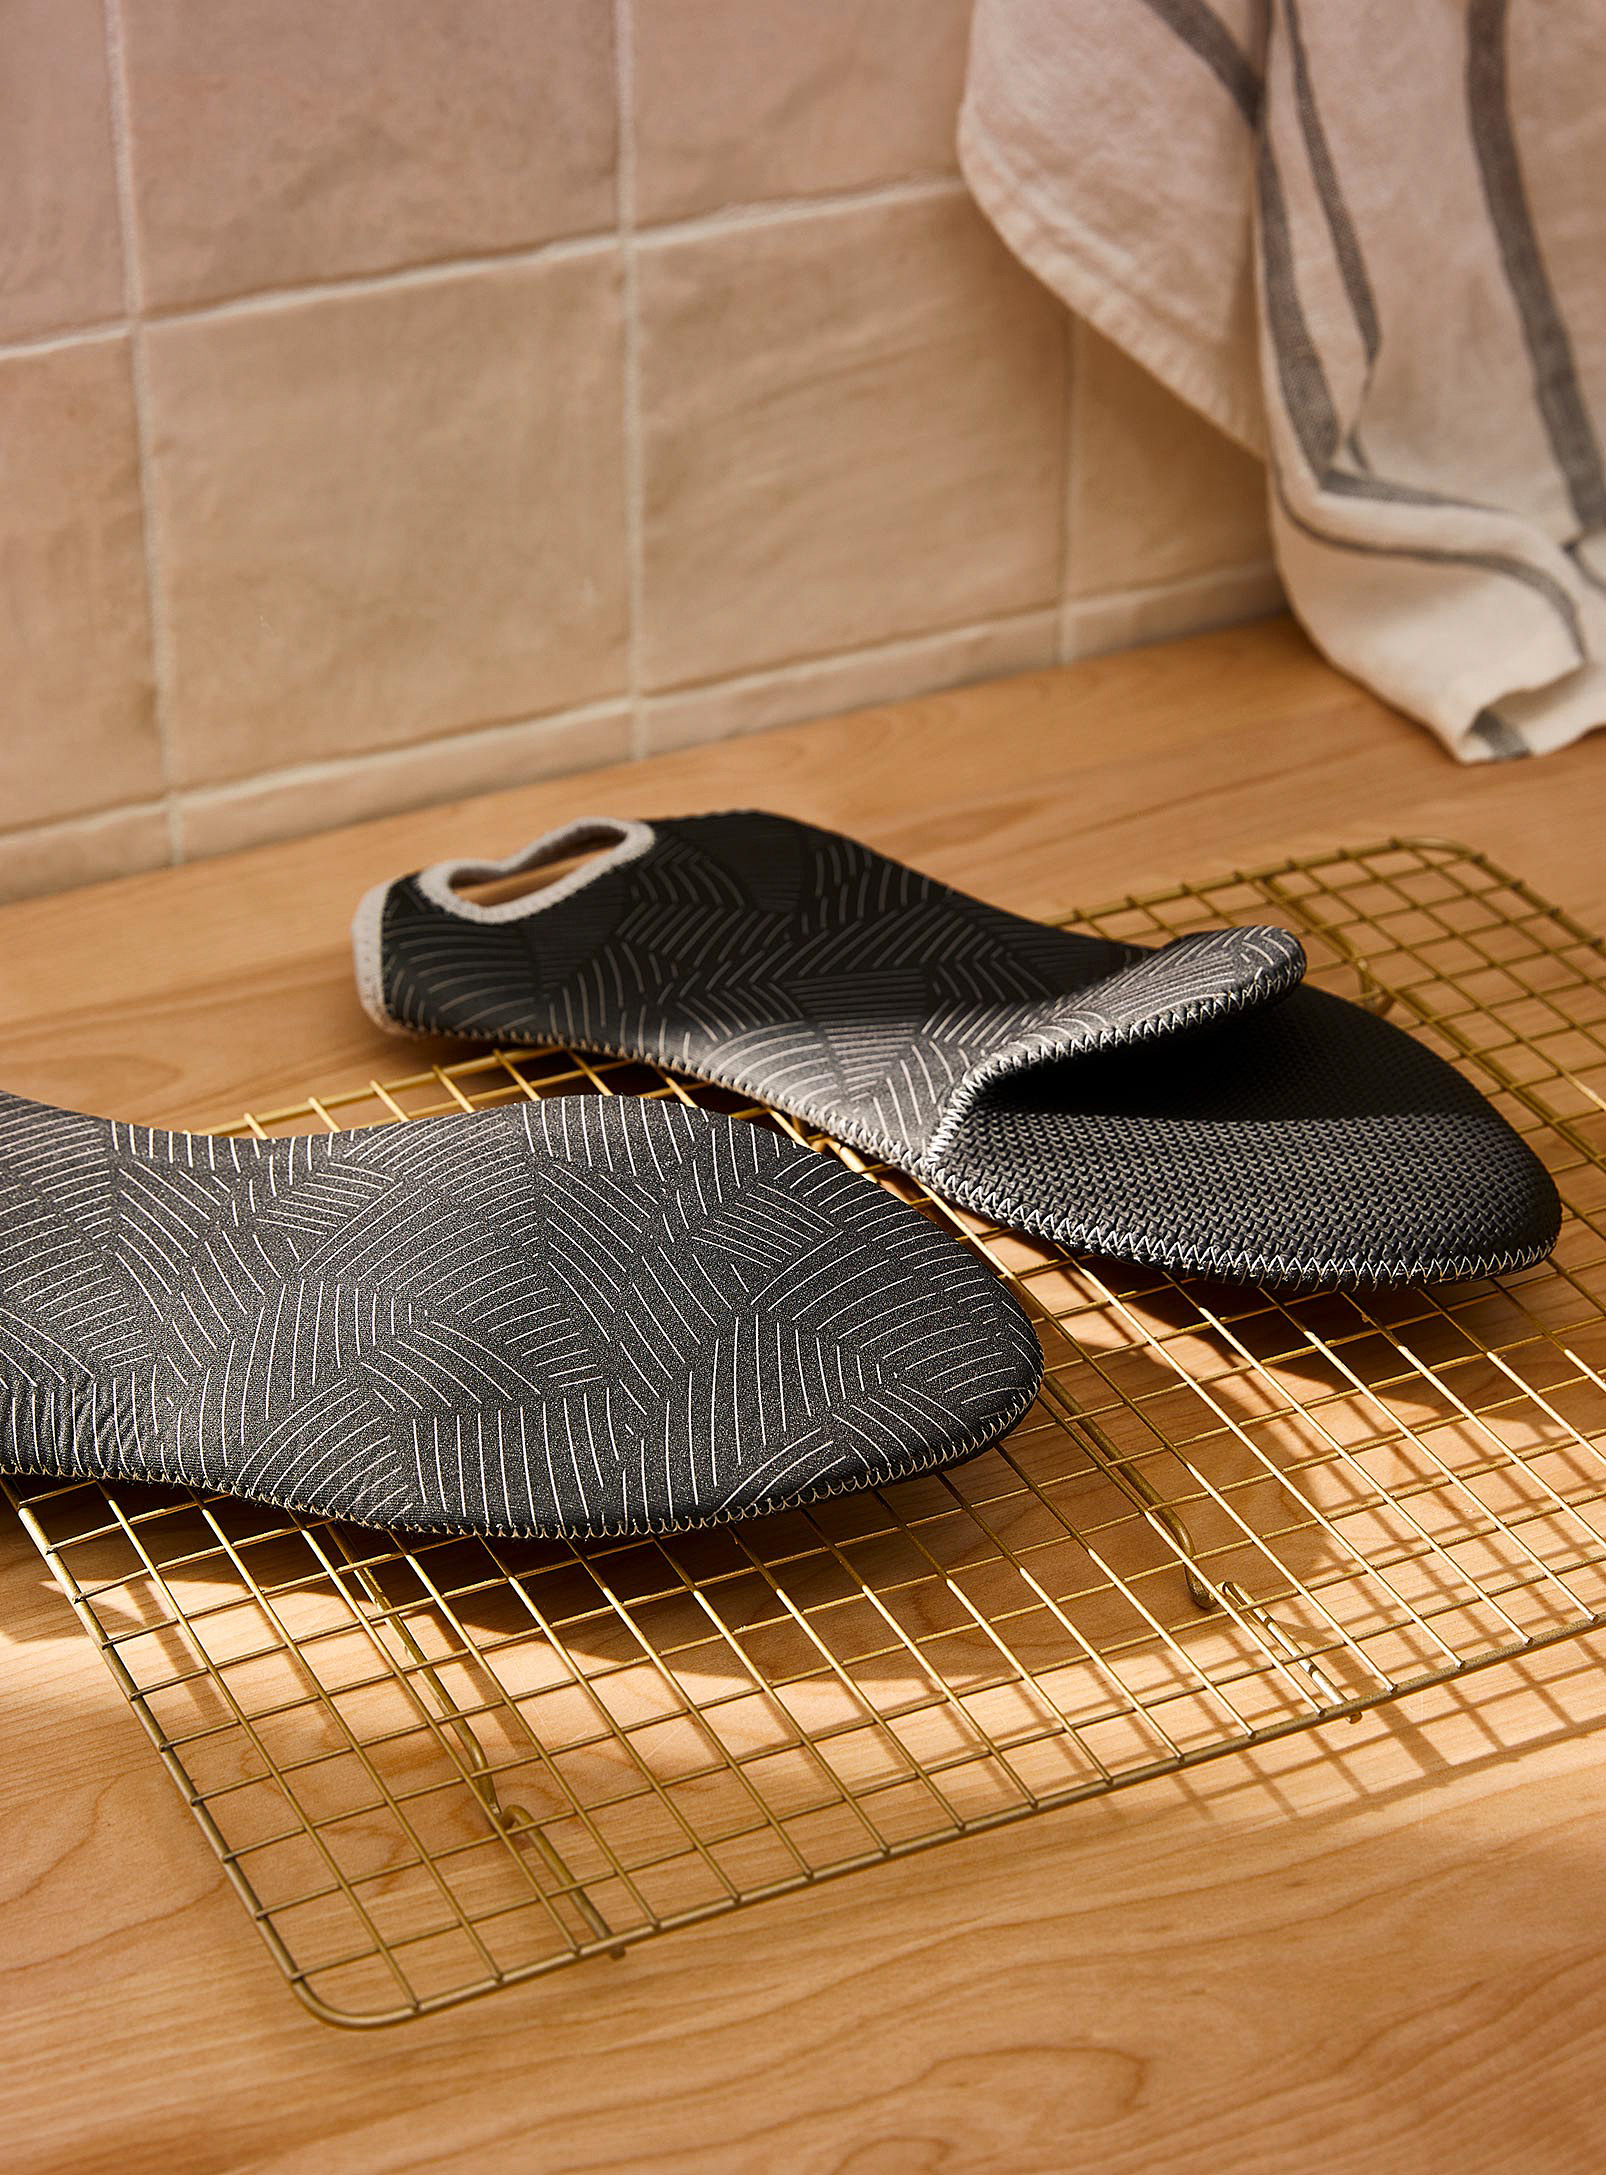 Simons Maison - Curved lines neoprene oven mitts Set of 2